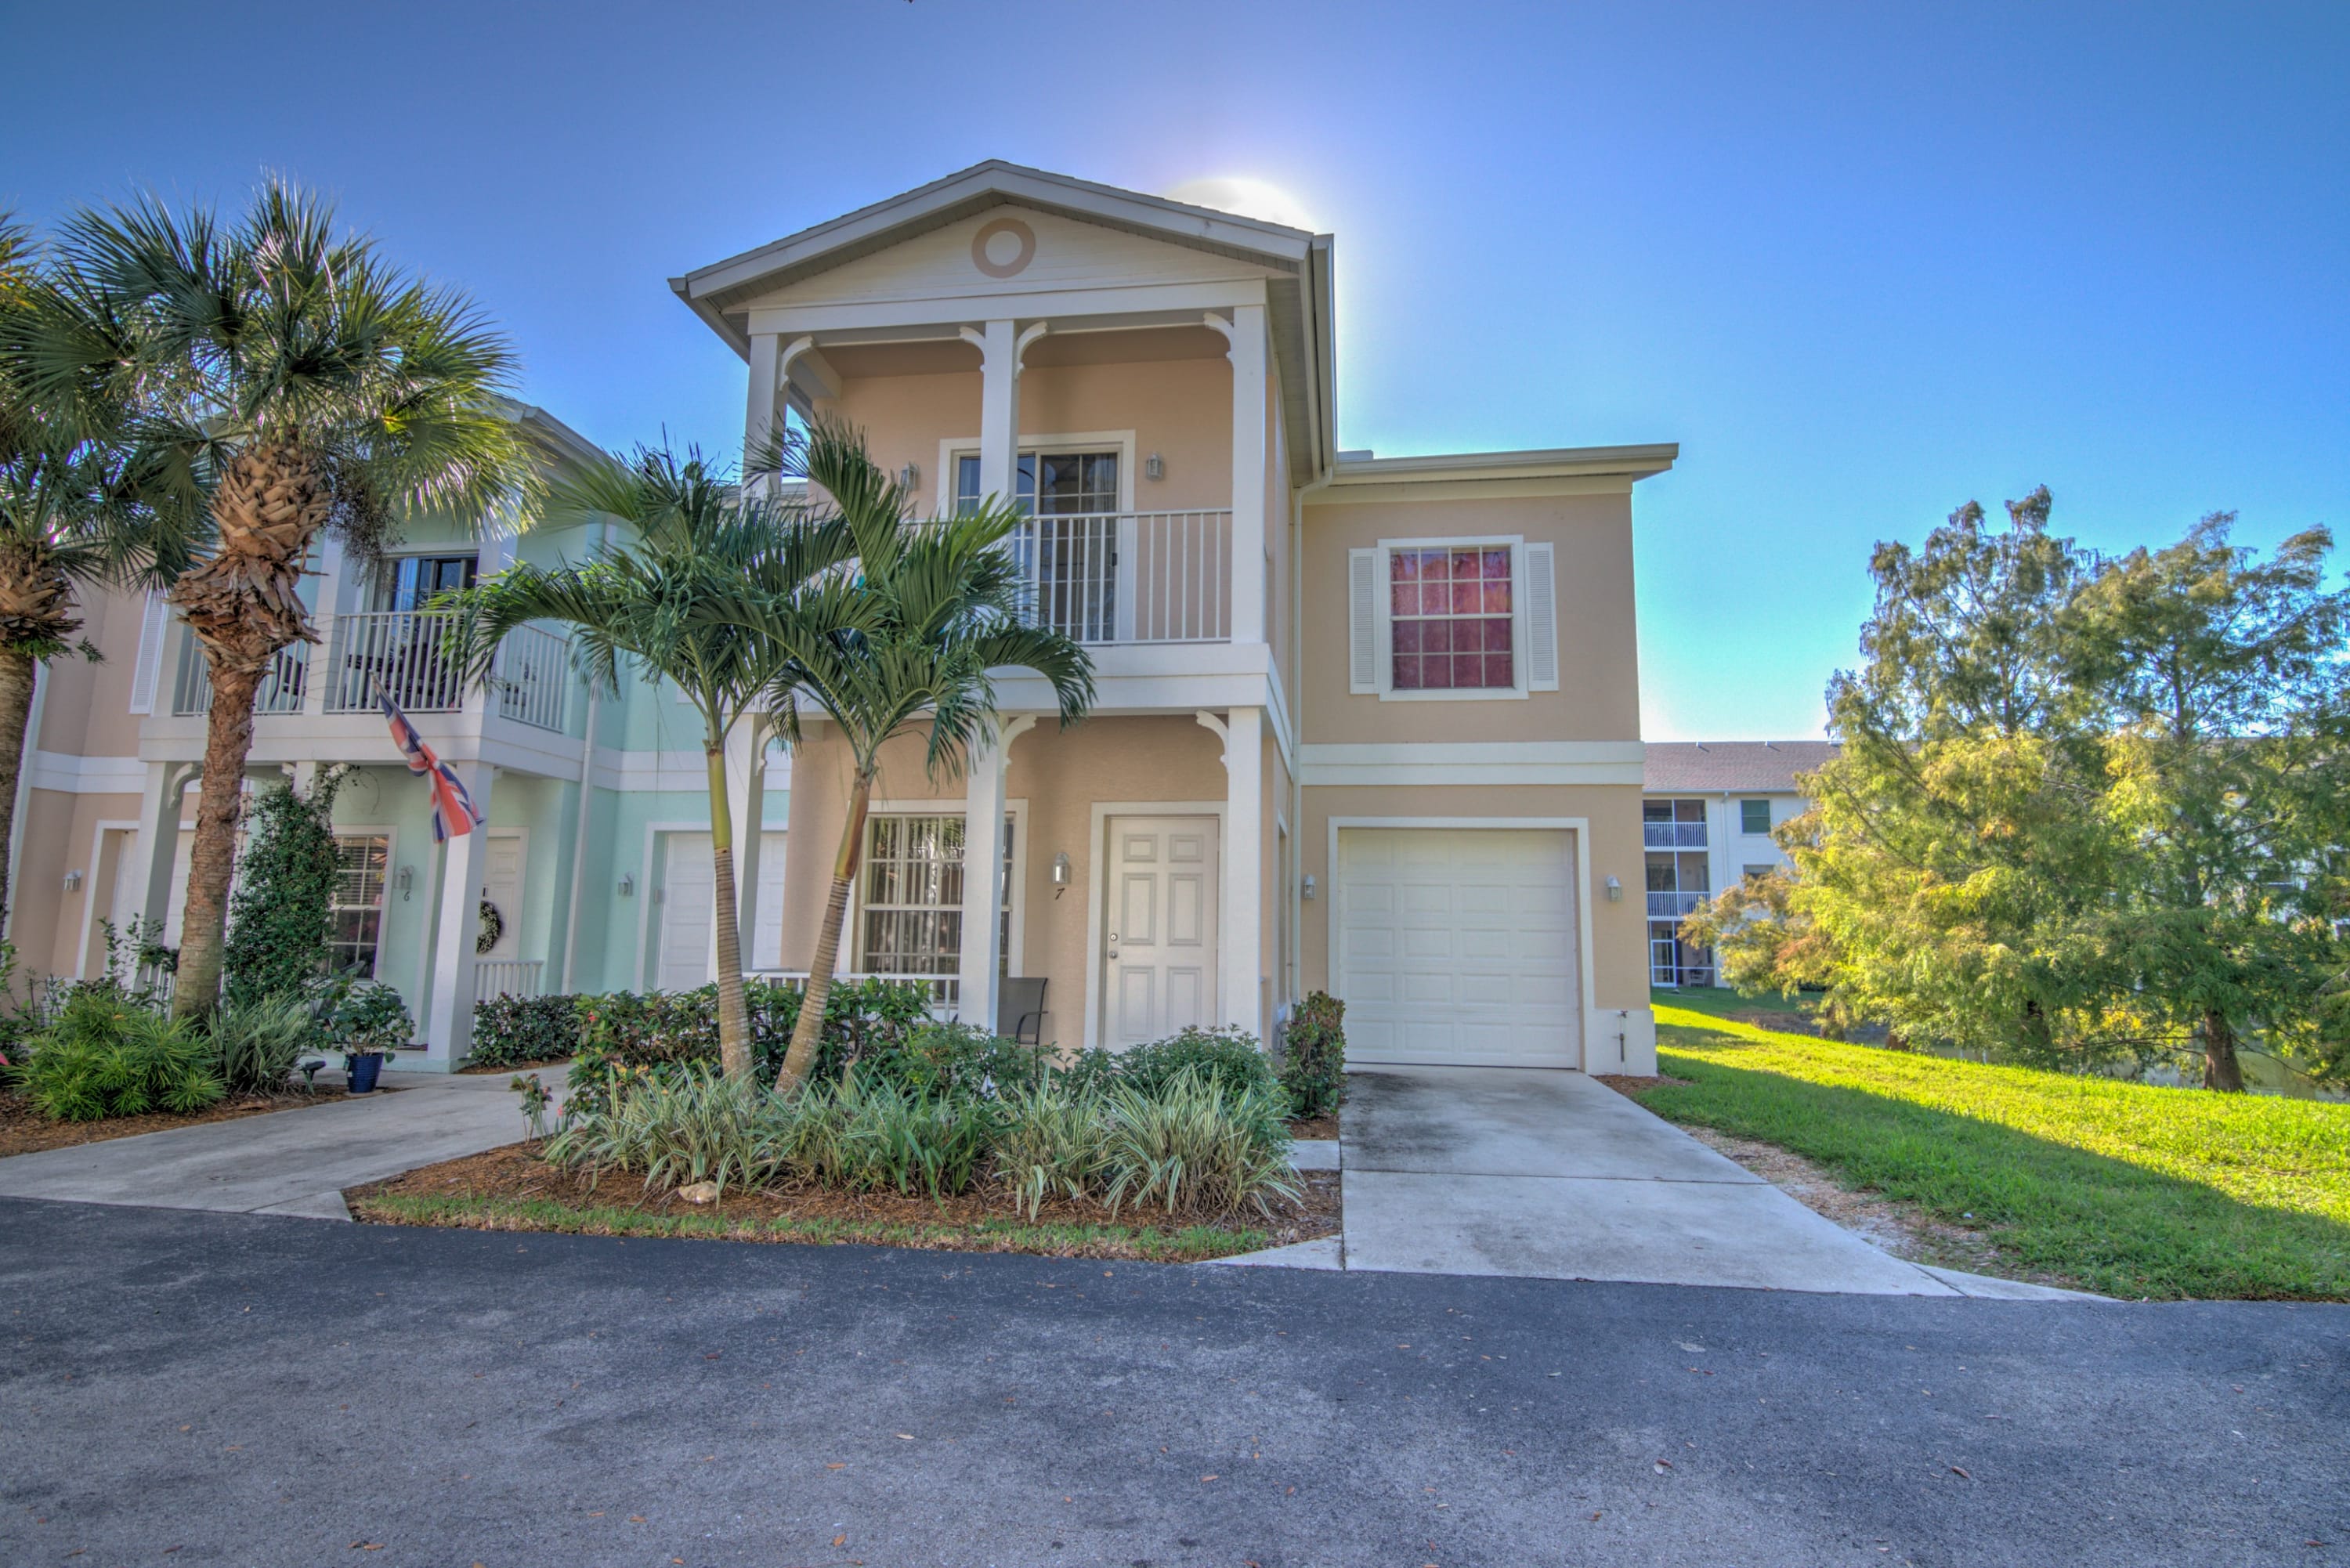 Property Image 1 - Stay in North Naples at This Value Priced Townhome Right off Pine Ridge Road!